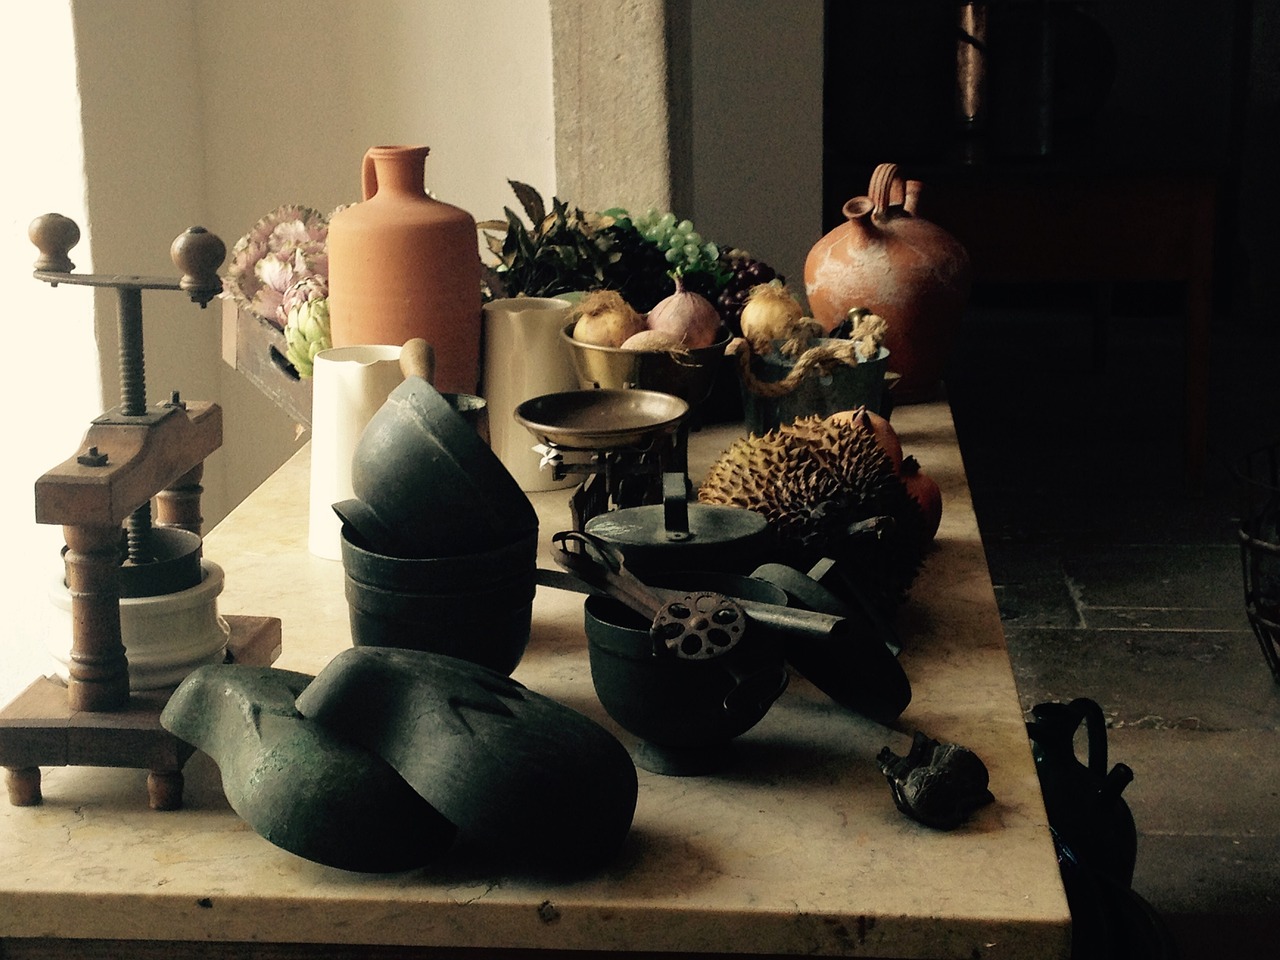 Clay pots on a table